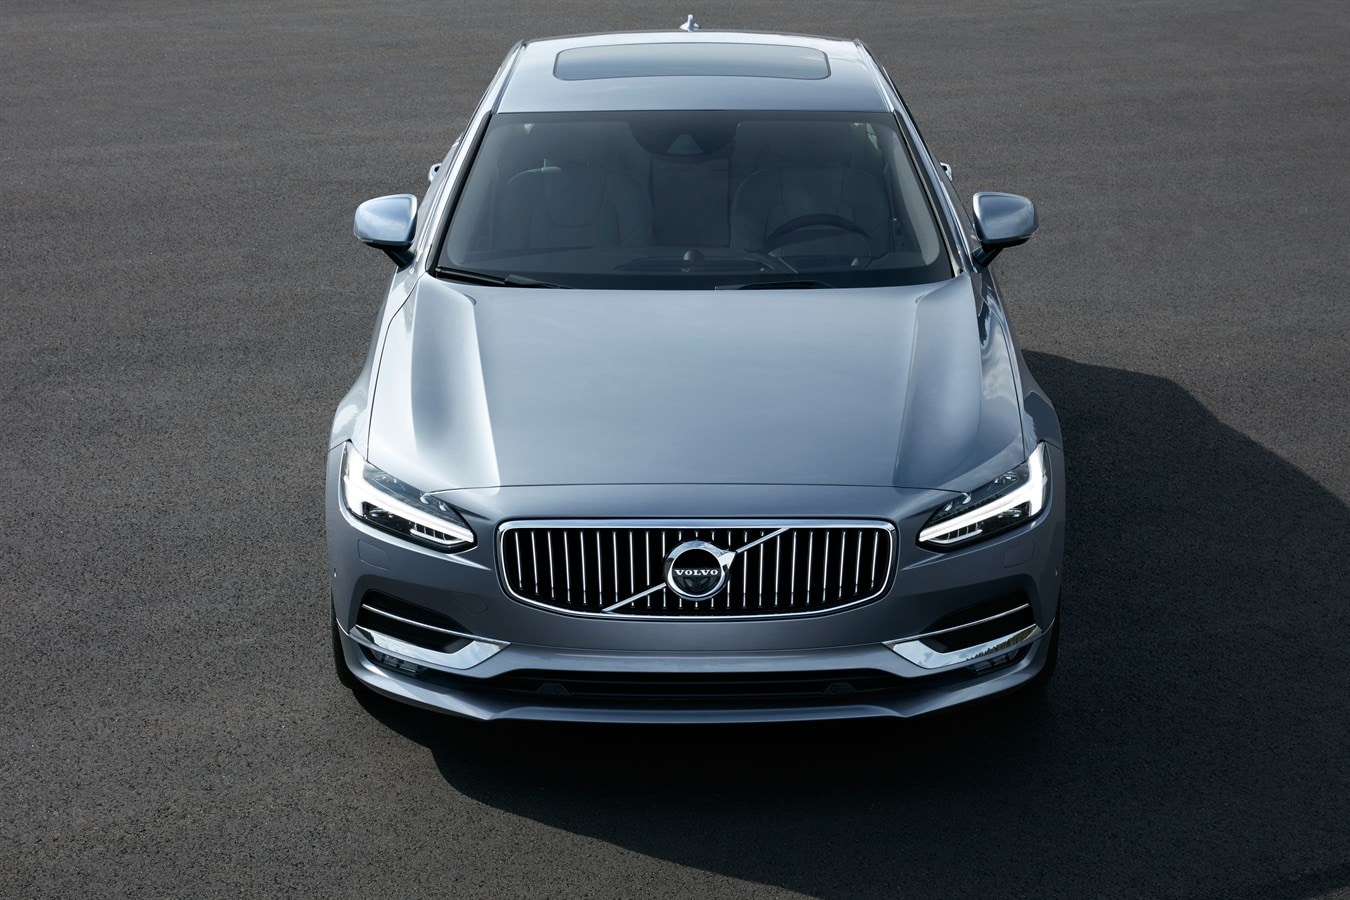 2019 Volvo S90 Excellence Trim Adds Top-of-the-Line Amenities